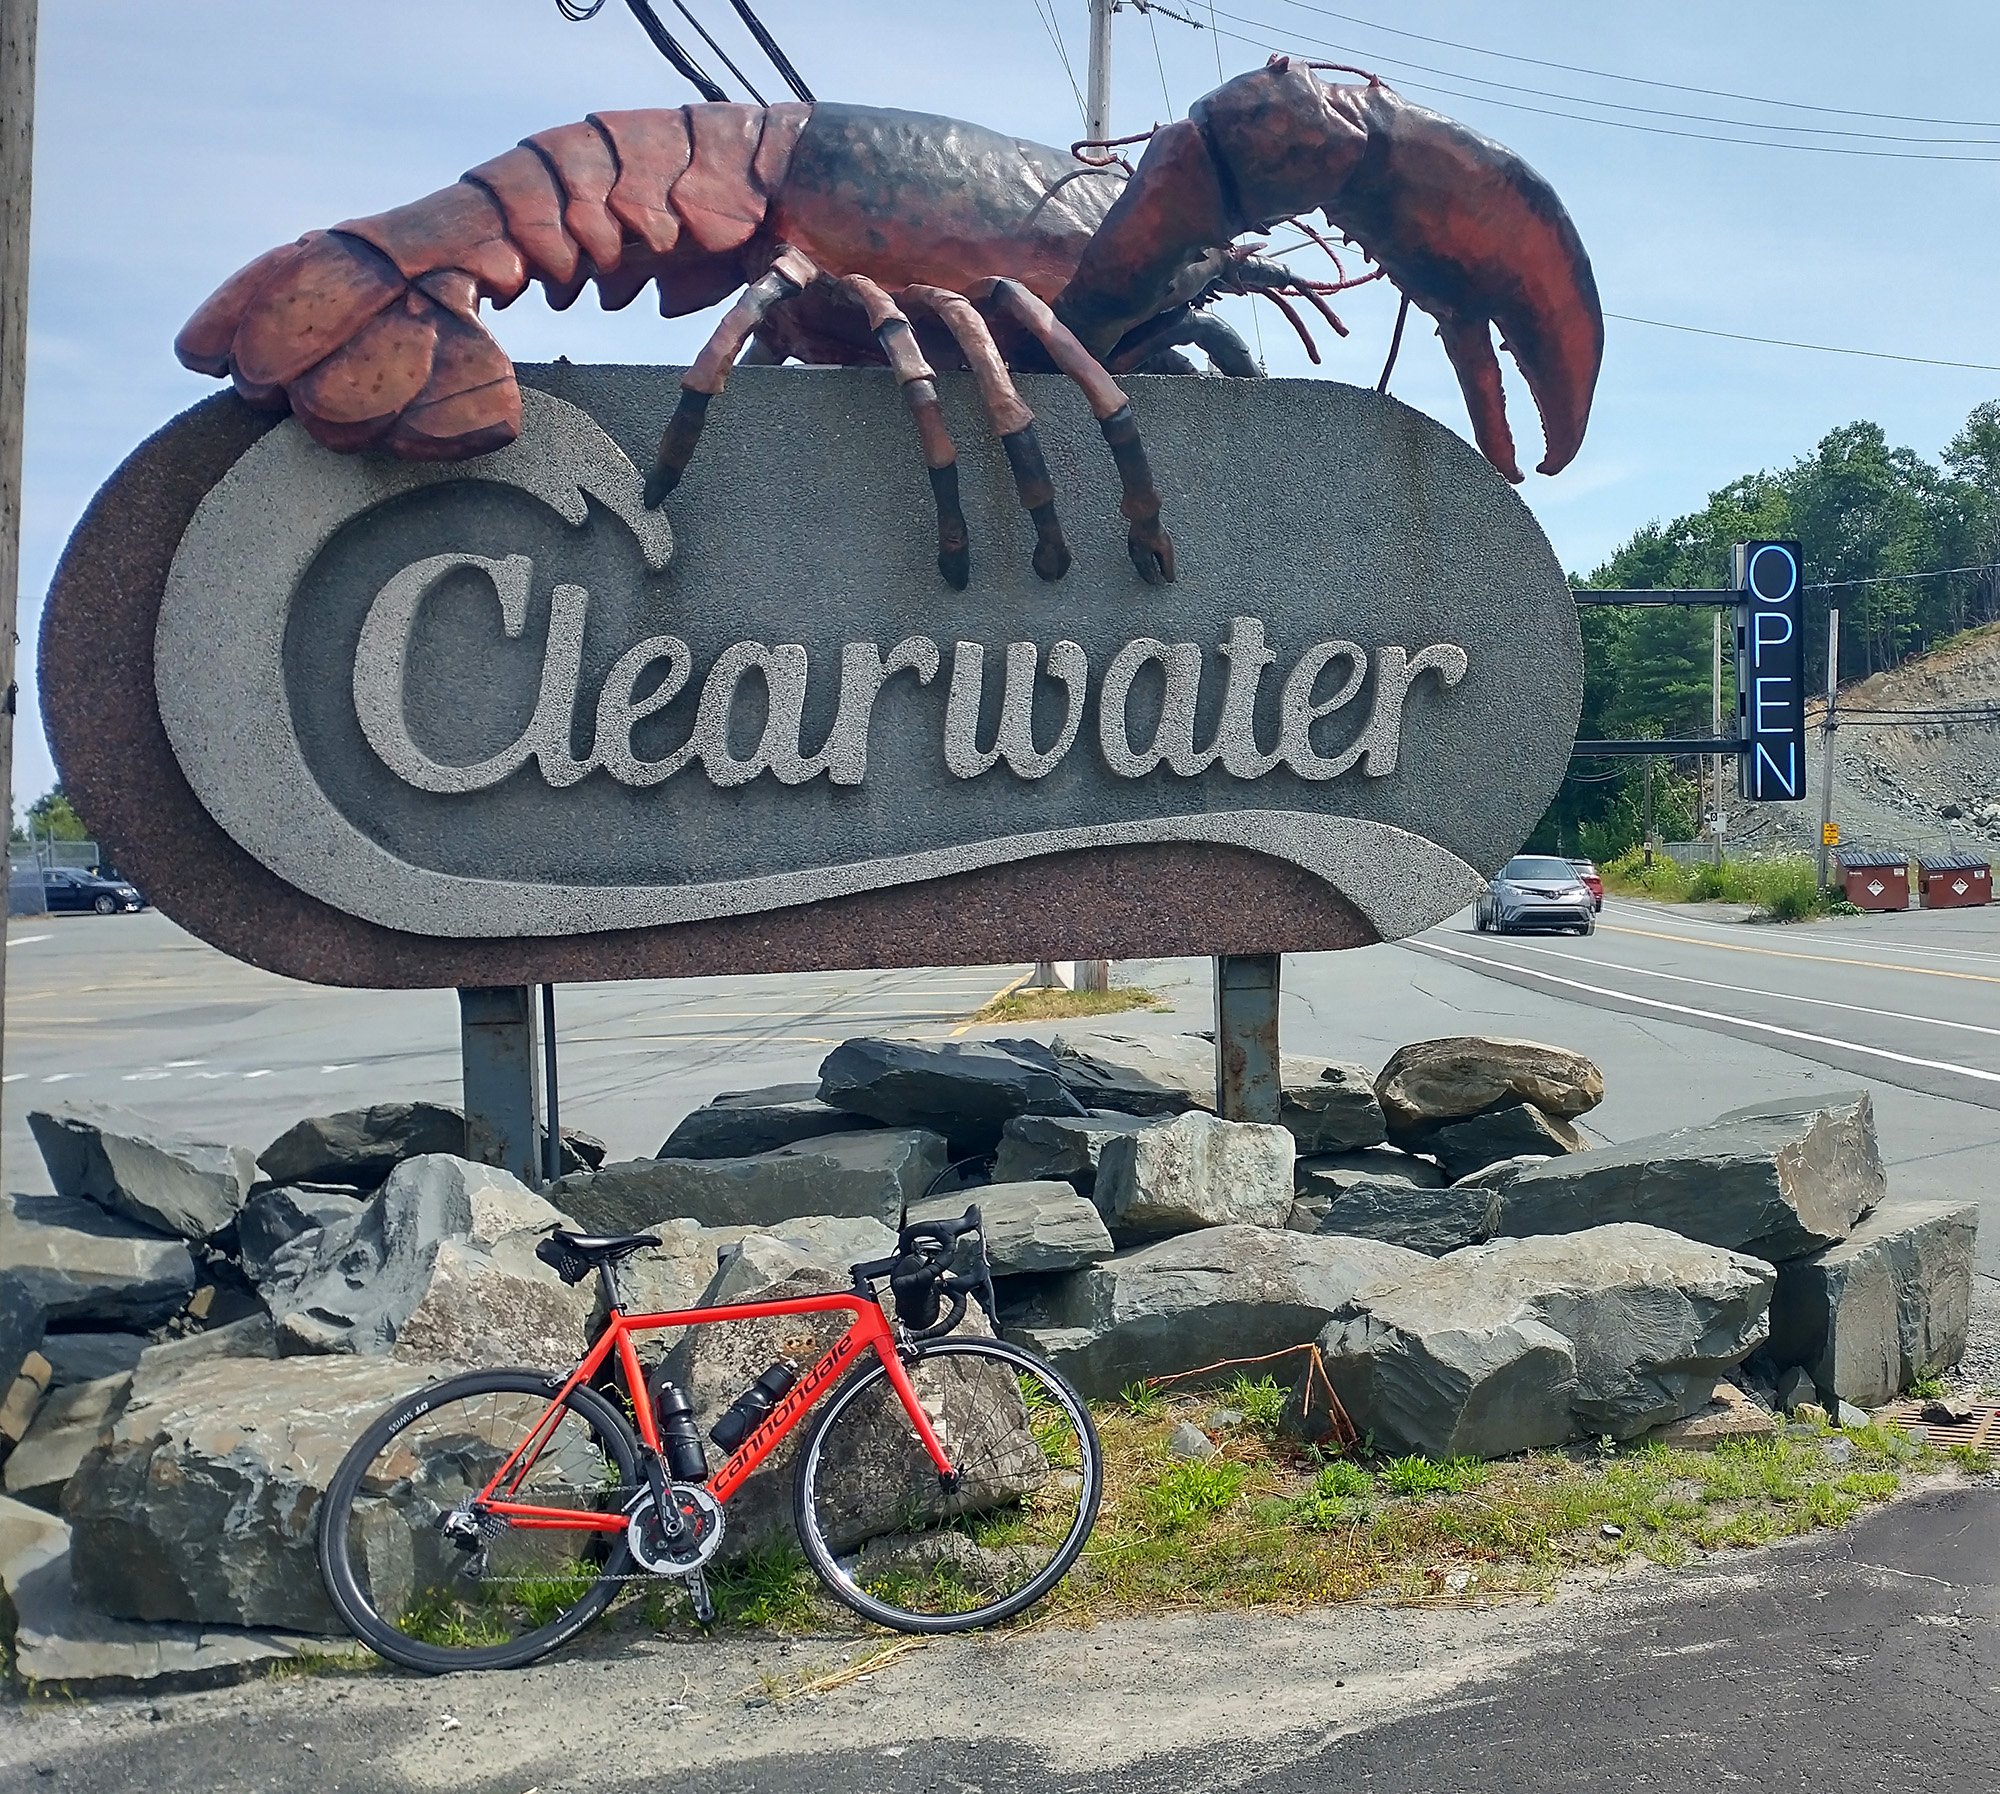 Heading back to Halifax. Lots of seafood restaurants all along the highway.